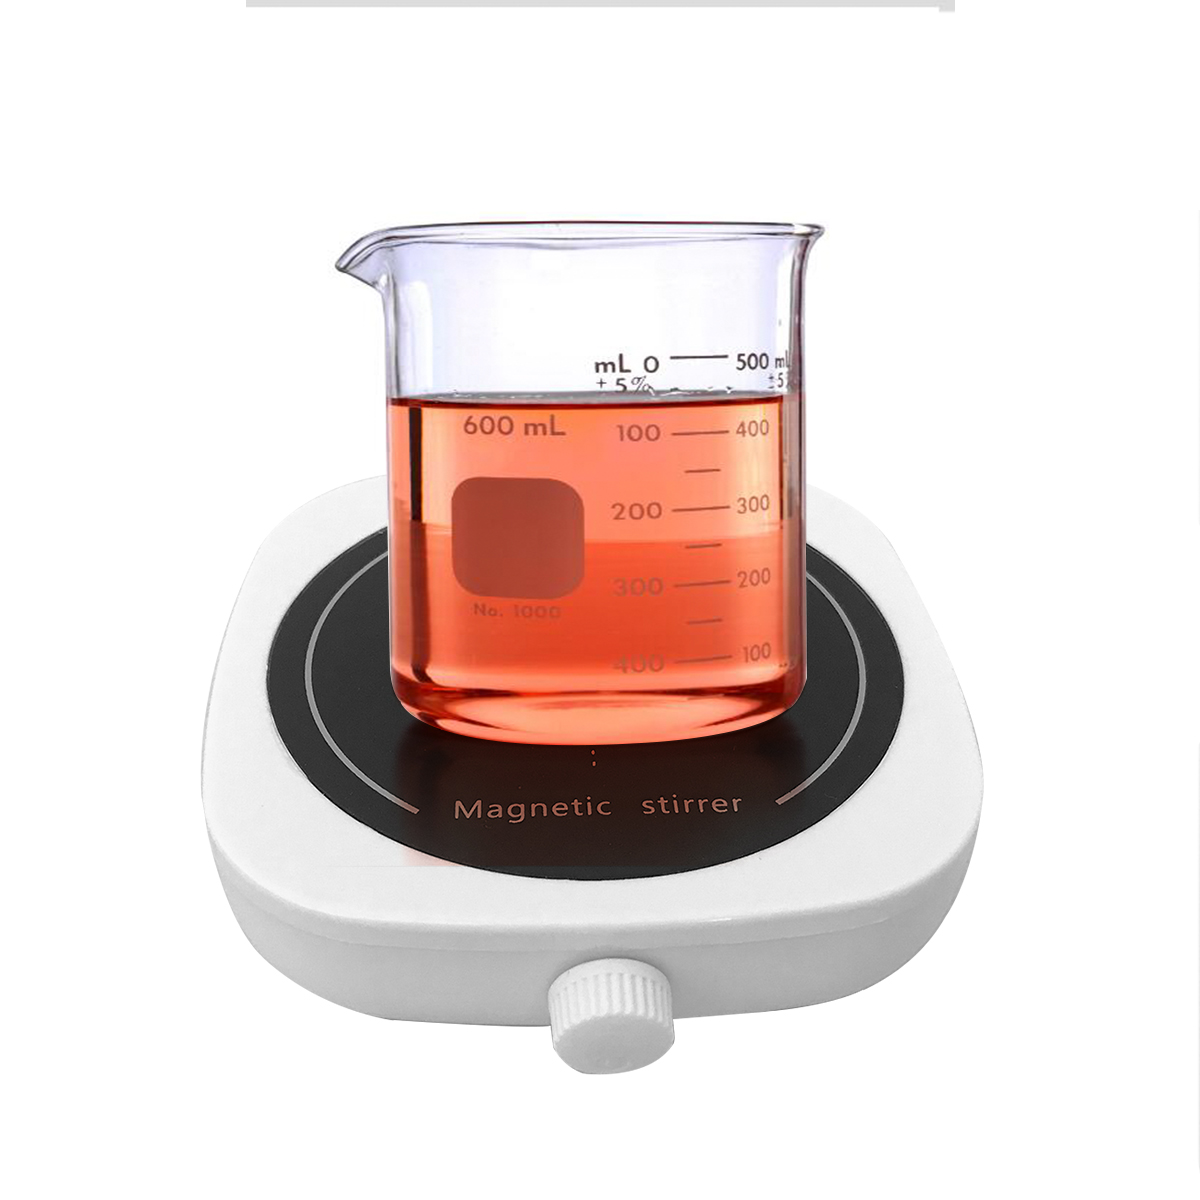 2L Magnetic Stirrer Laboratory Equipment Magnetic Agitator Magnetic Mixer 2L Stirring Capacity For Home Lab Educational